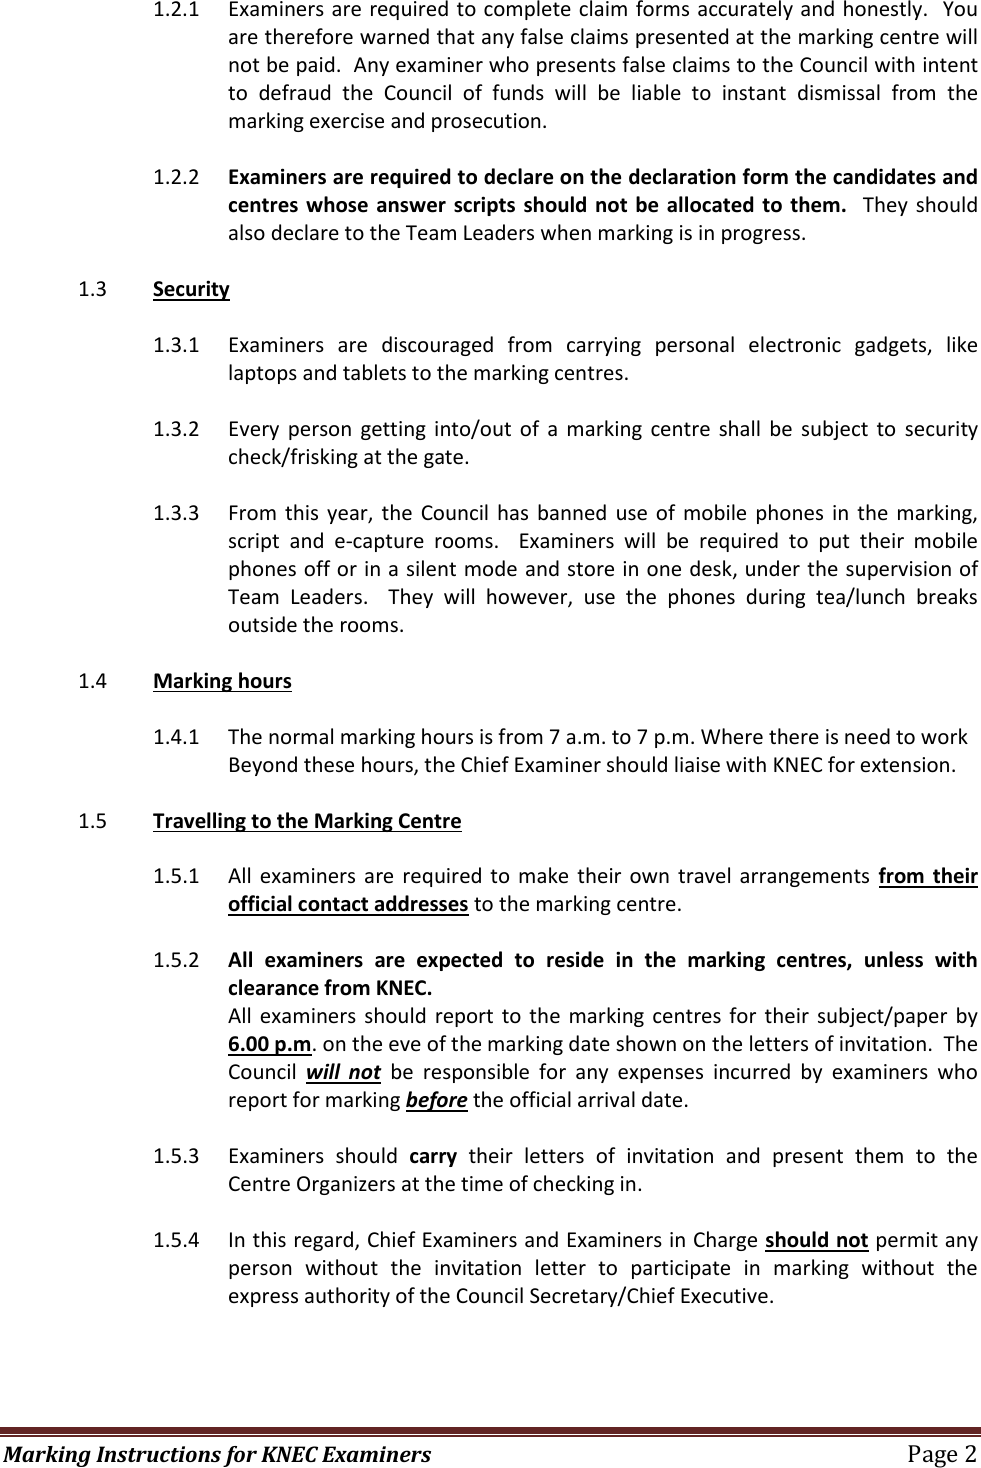 Page 2 of 7 - 02015 MARKING INSTRUCTIONS